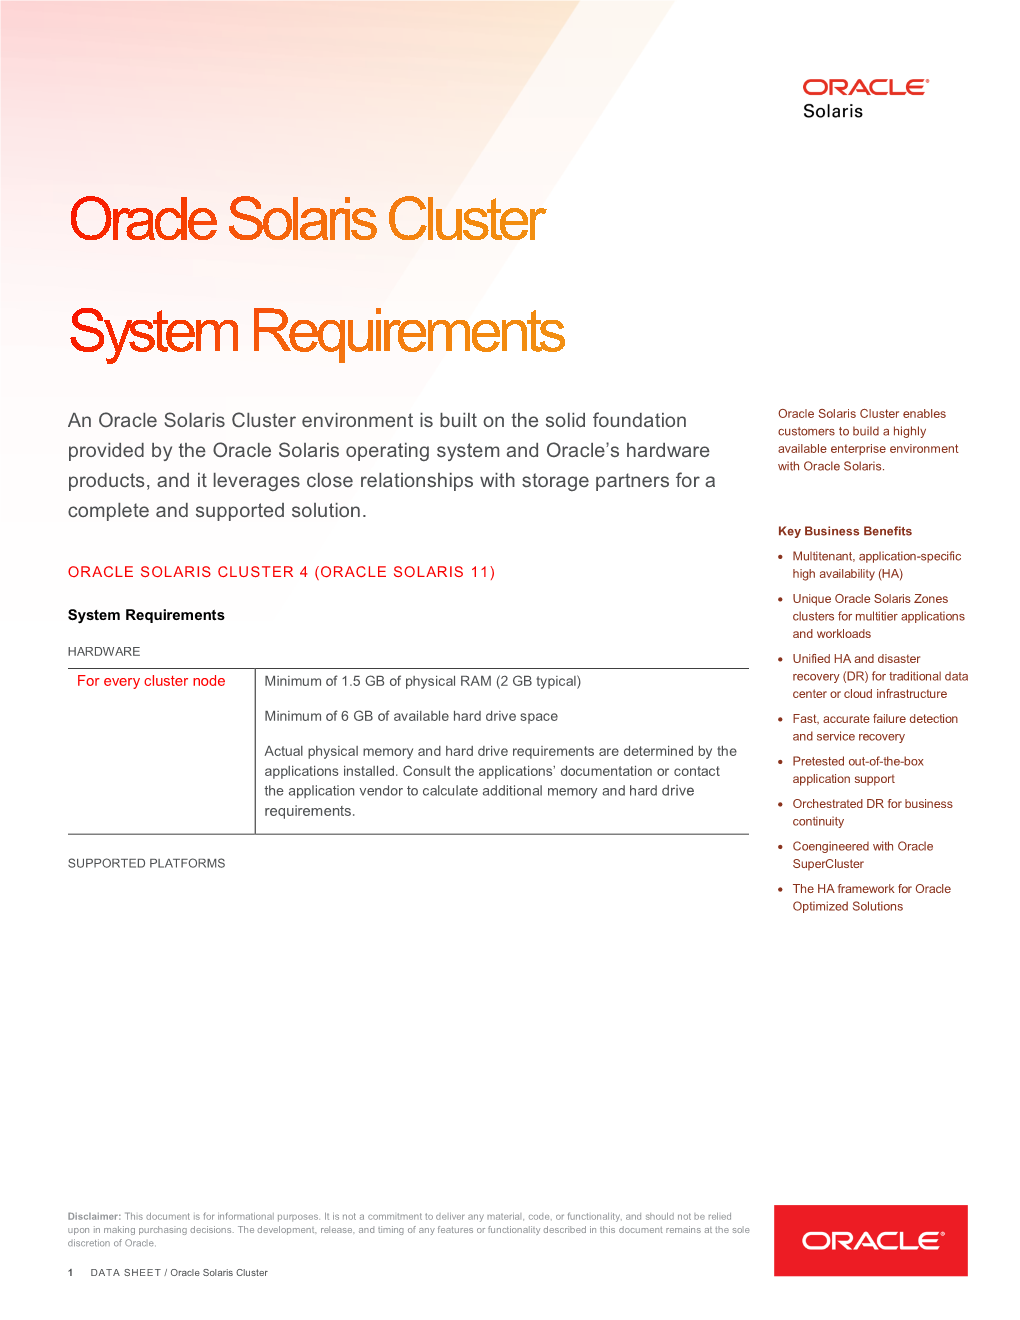 Oracle Solaris Cluster System Requirements